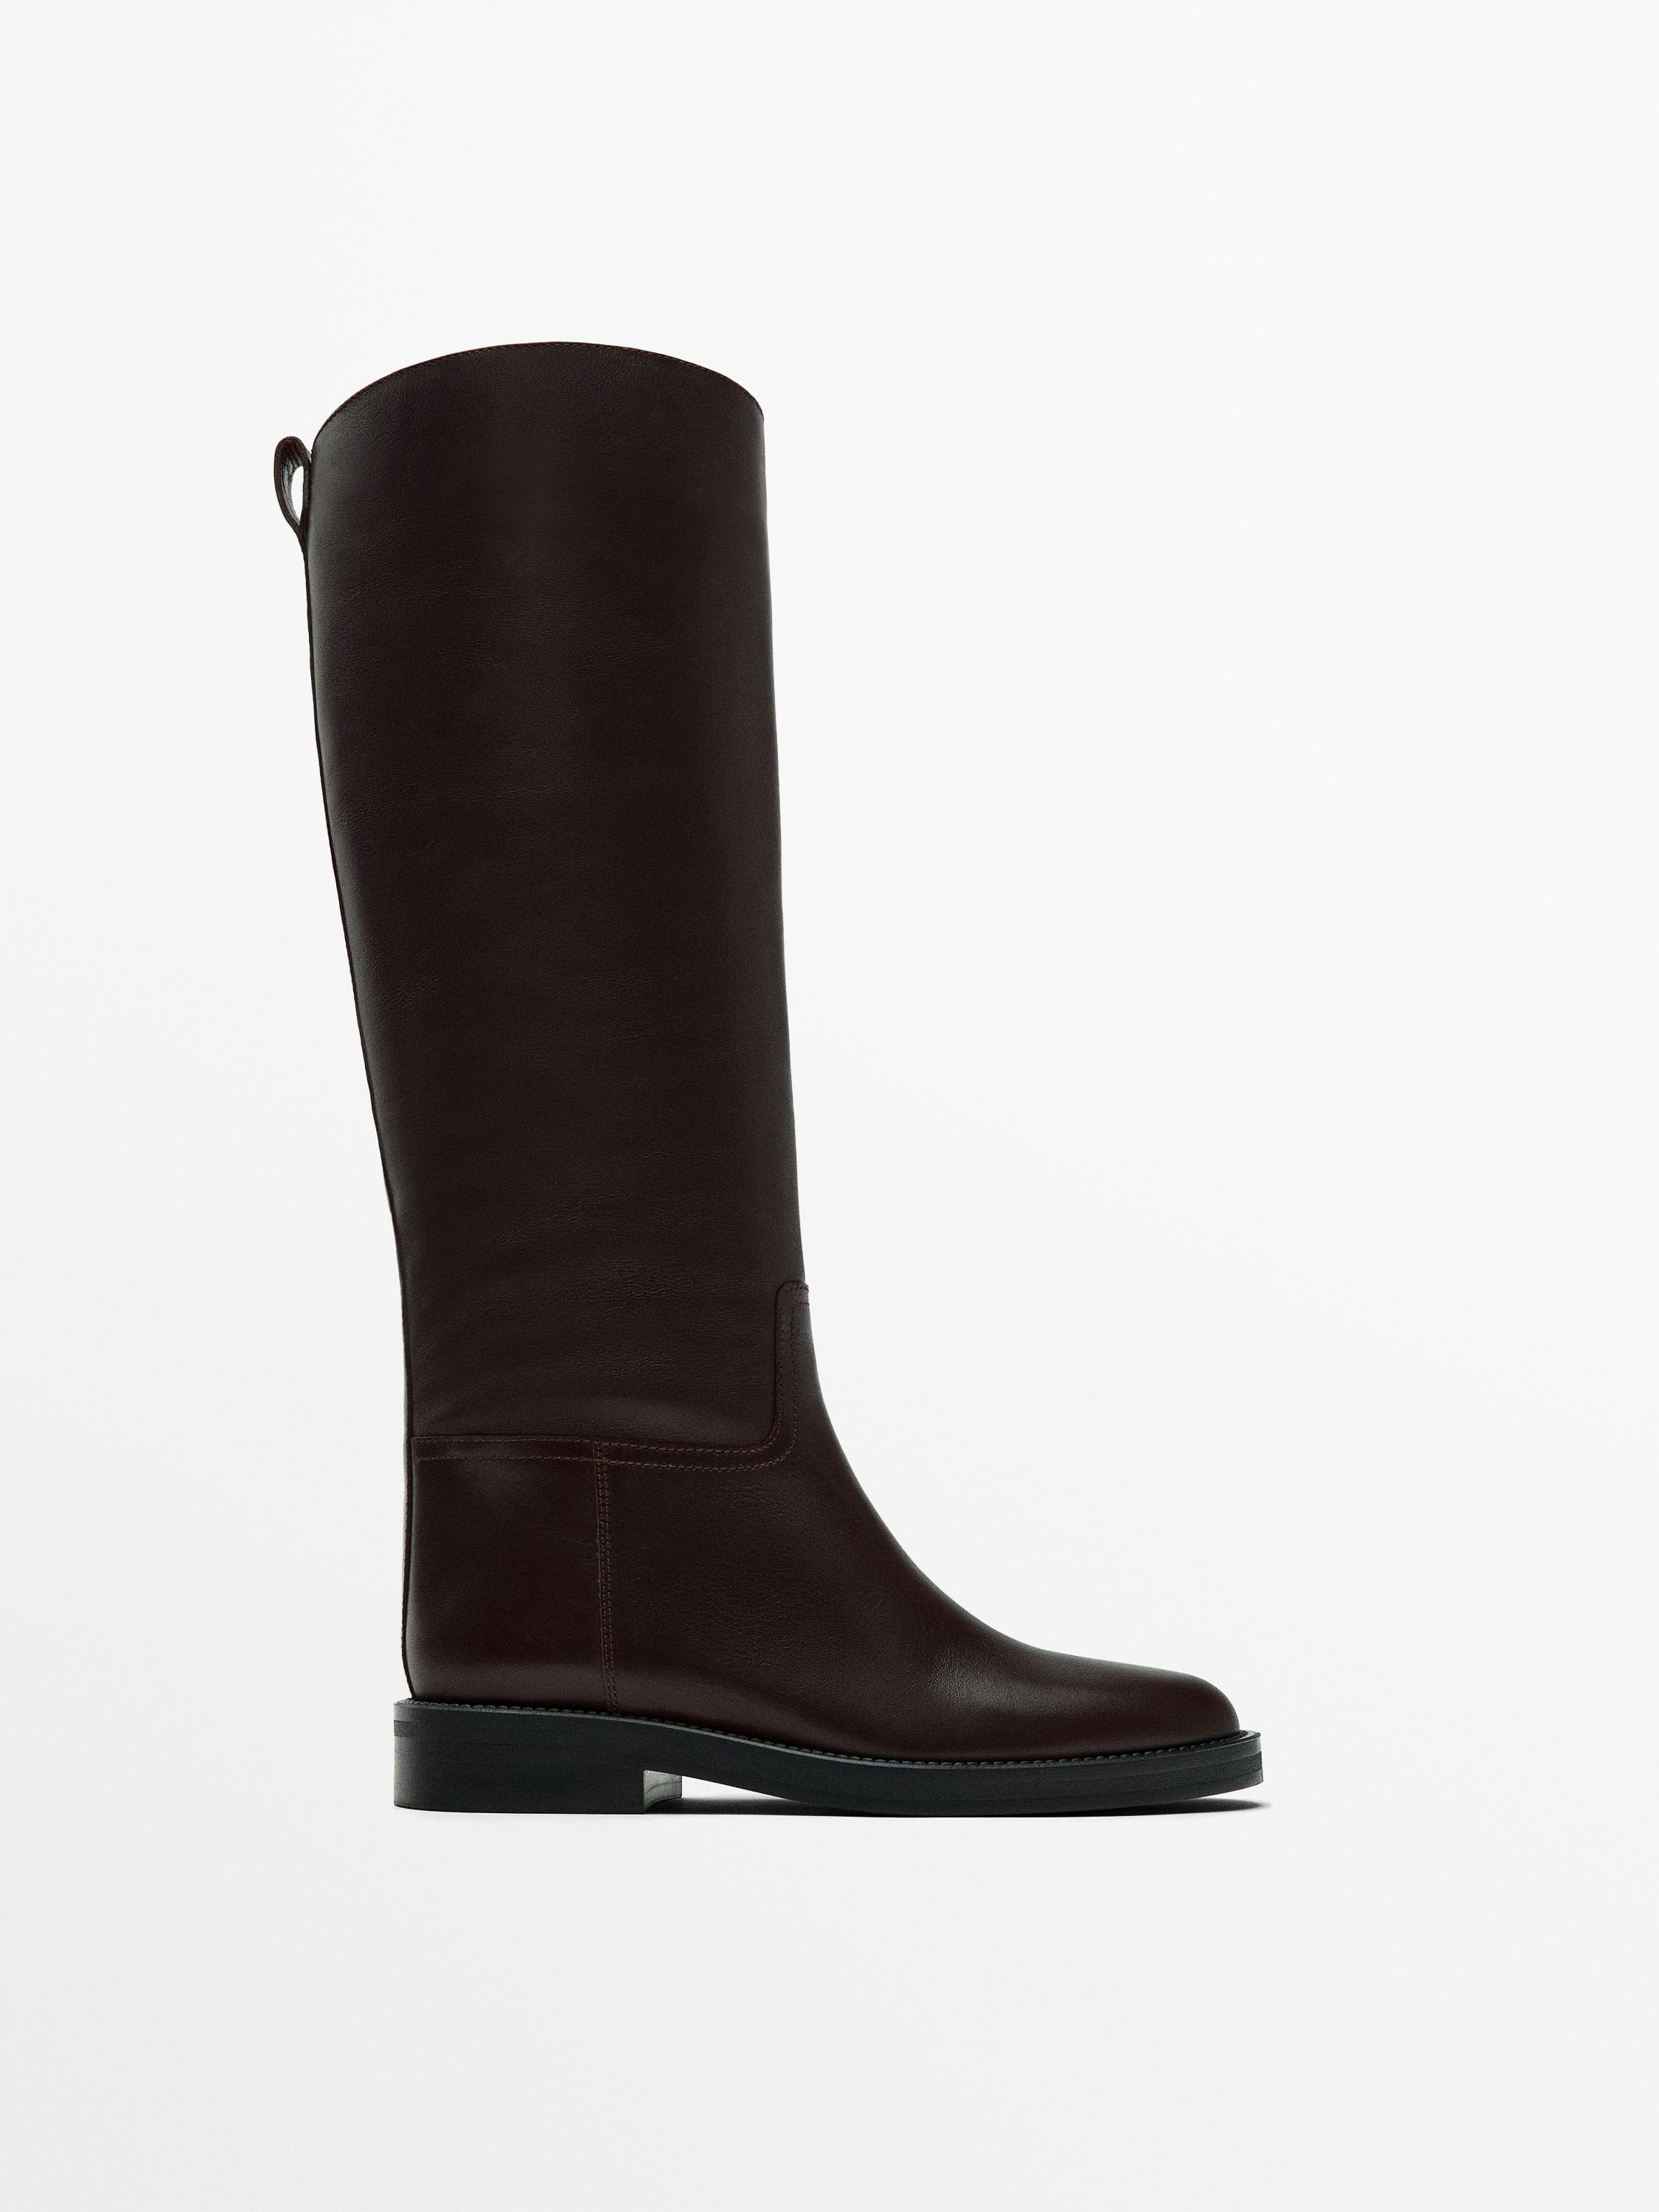 Riding-style boots - Brown | ZARA United States